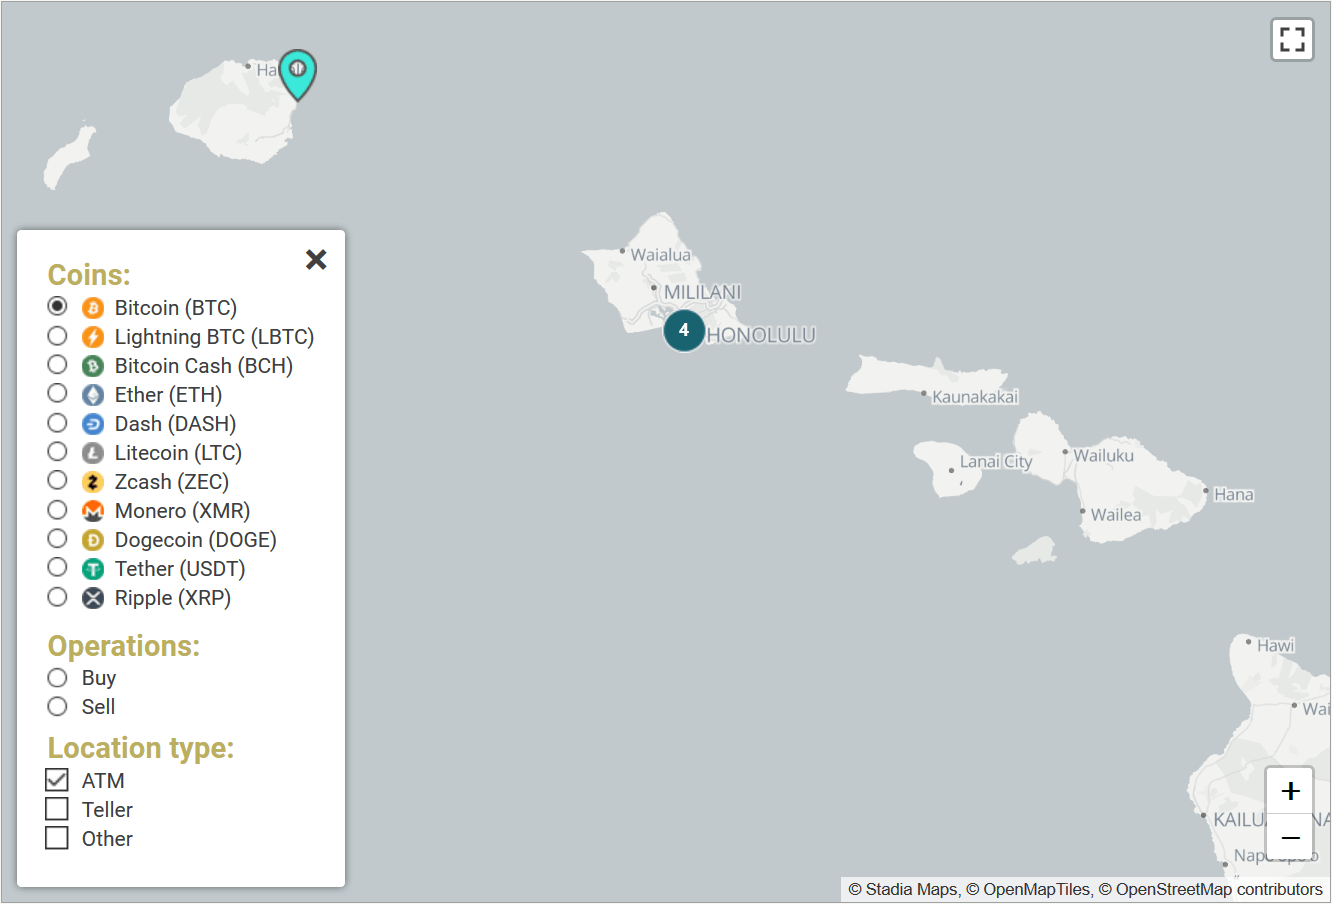 crypto exchanges allowed in hawaii